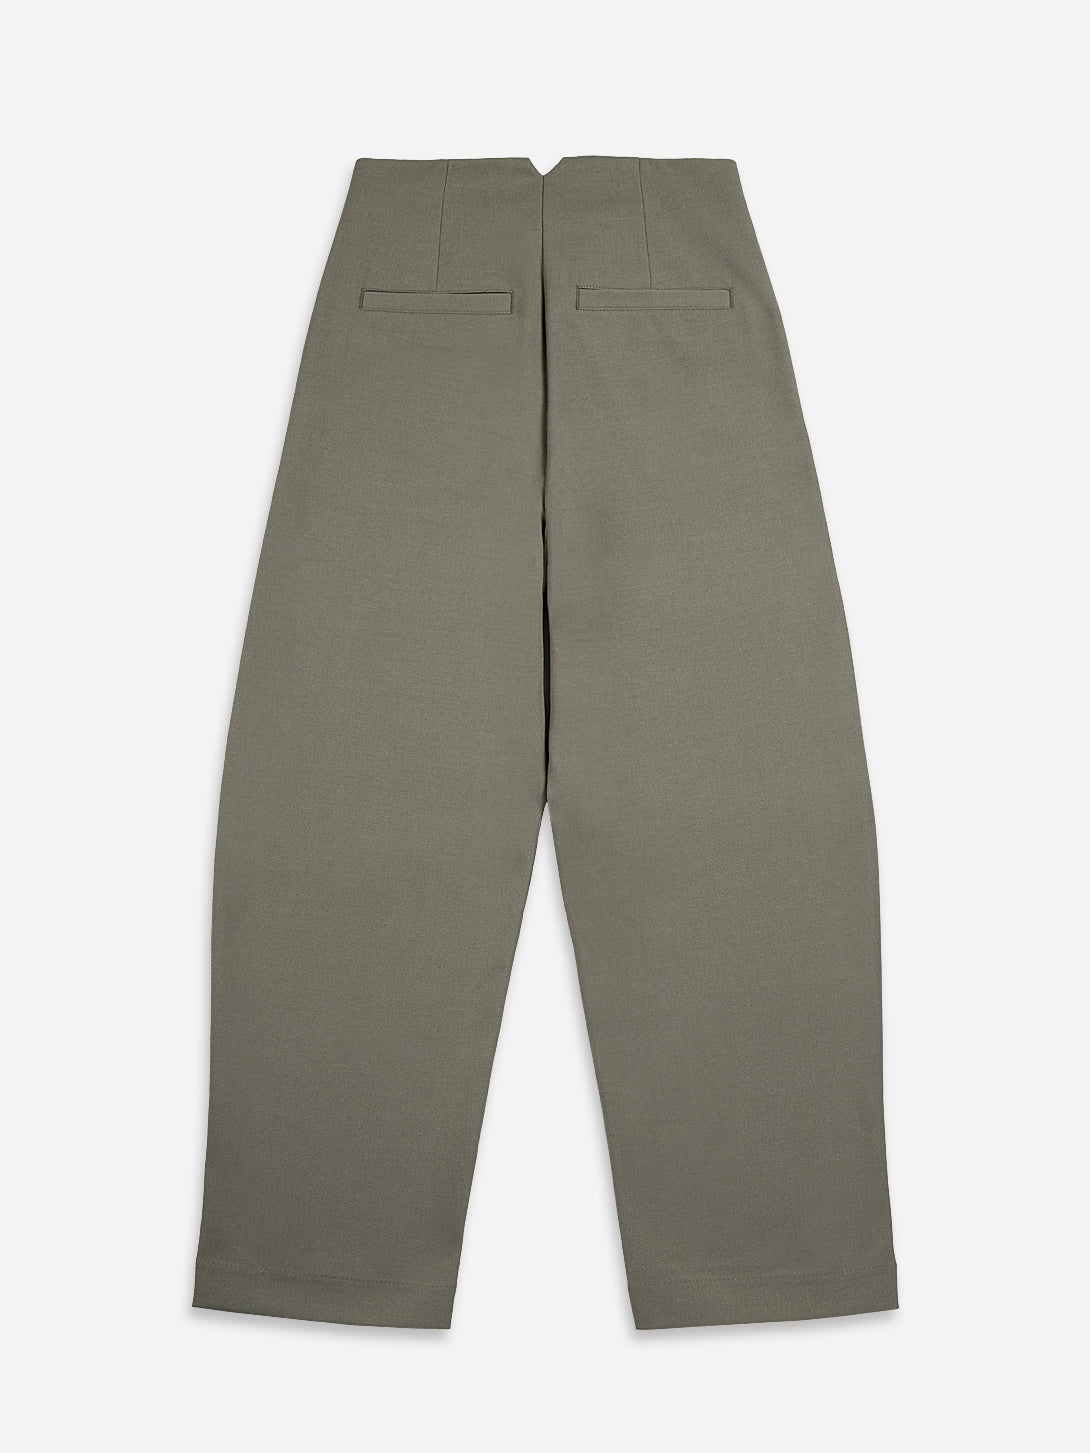 Khaki Seamless Barrel Trousers Womens Relaxed Fit Casual Pant